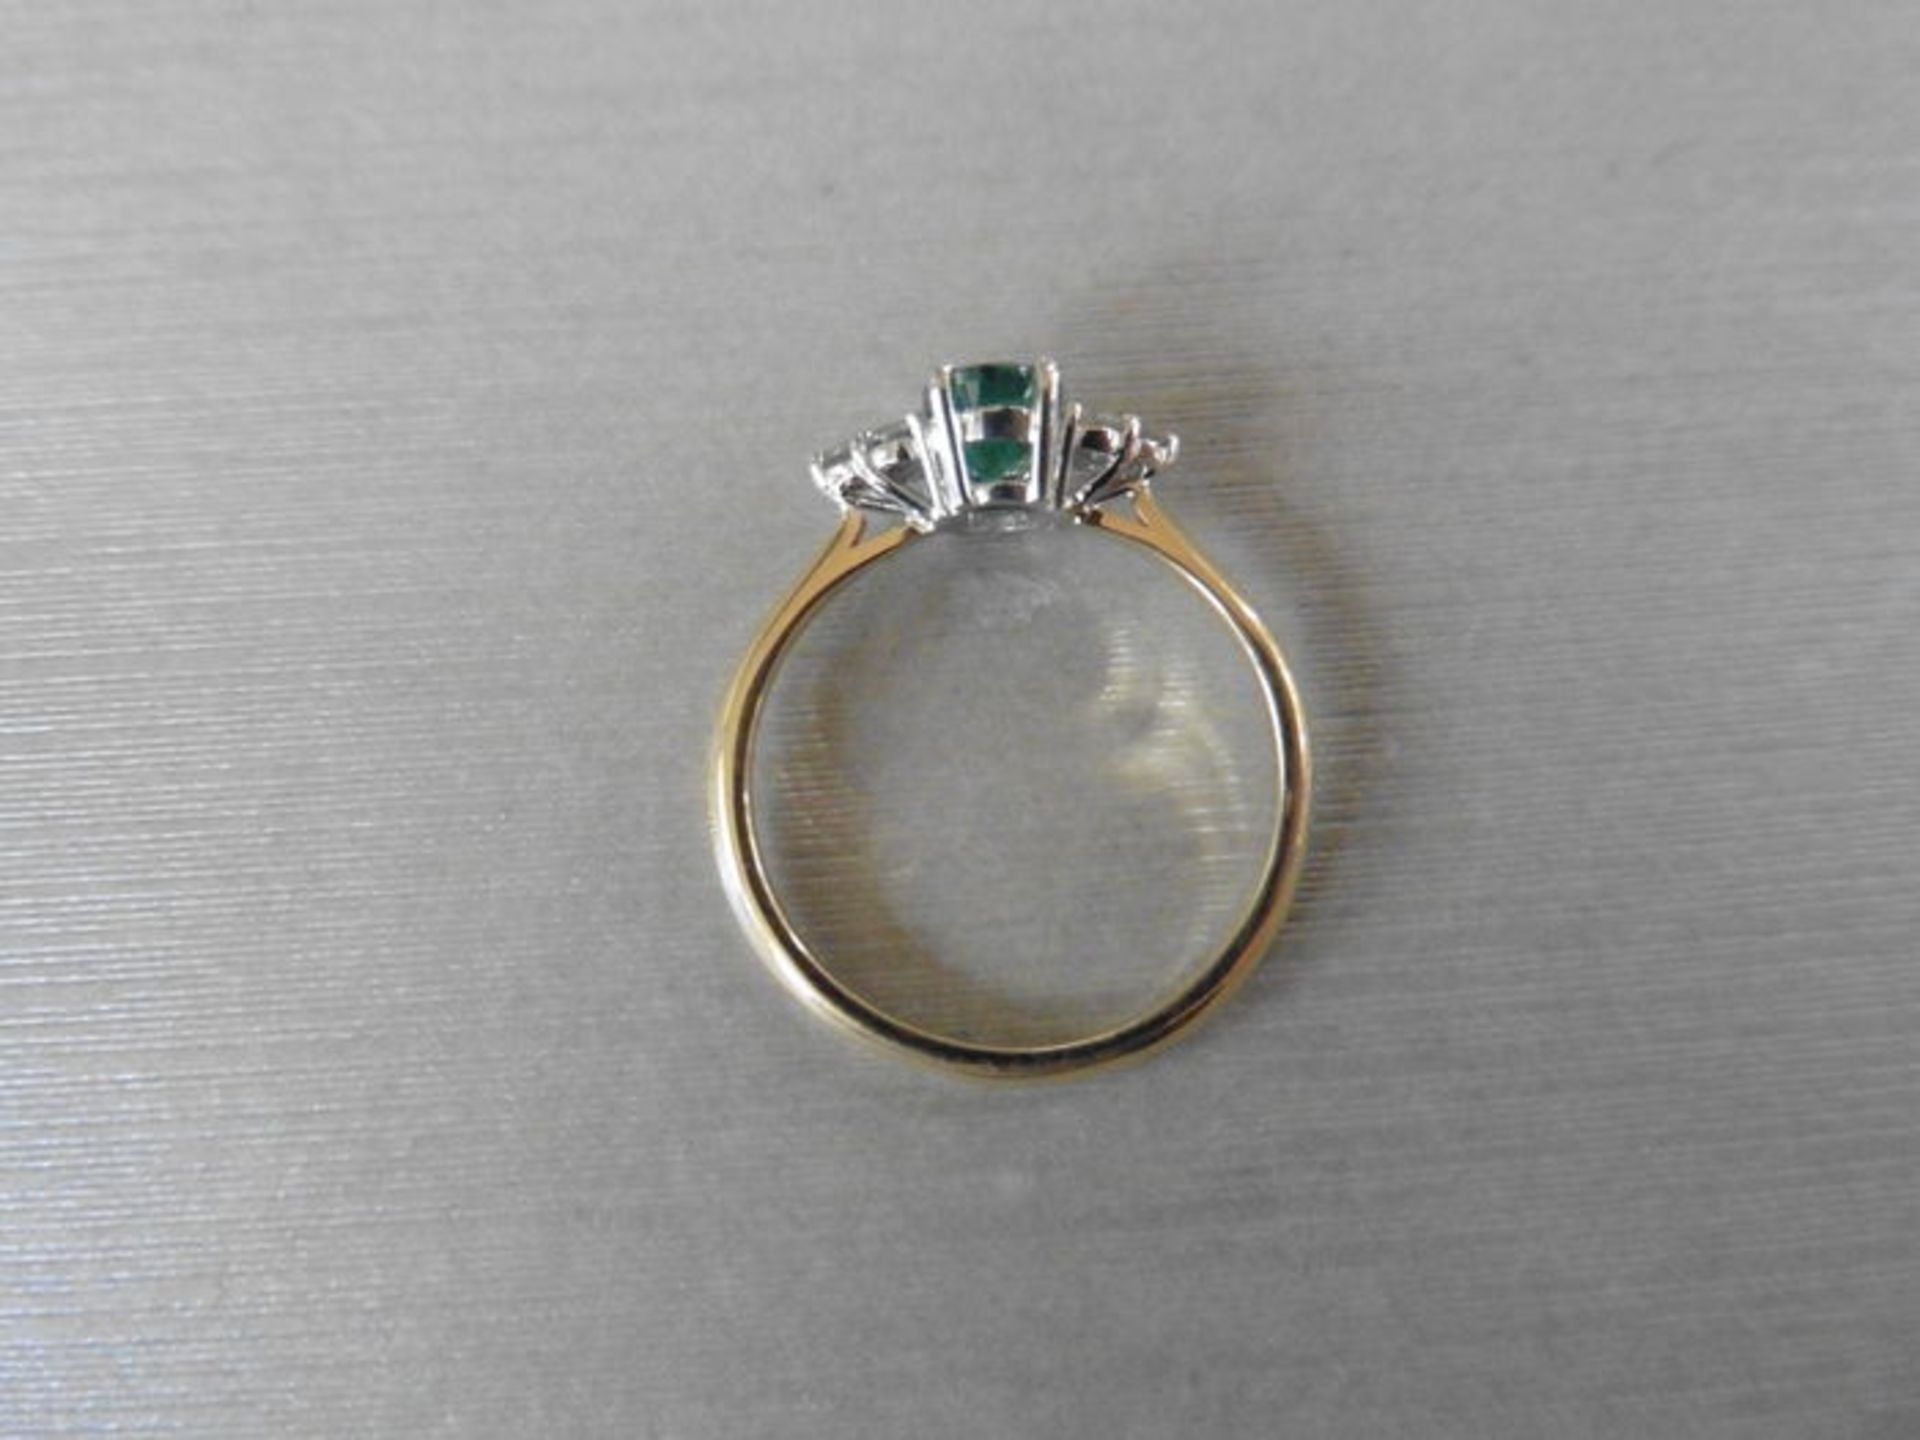 0.80ct emerald and diamond dress ring. 7x 5mm oval cut emerald (treated) with 3 small diamonds set - Image 2 of 3